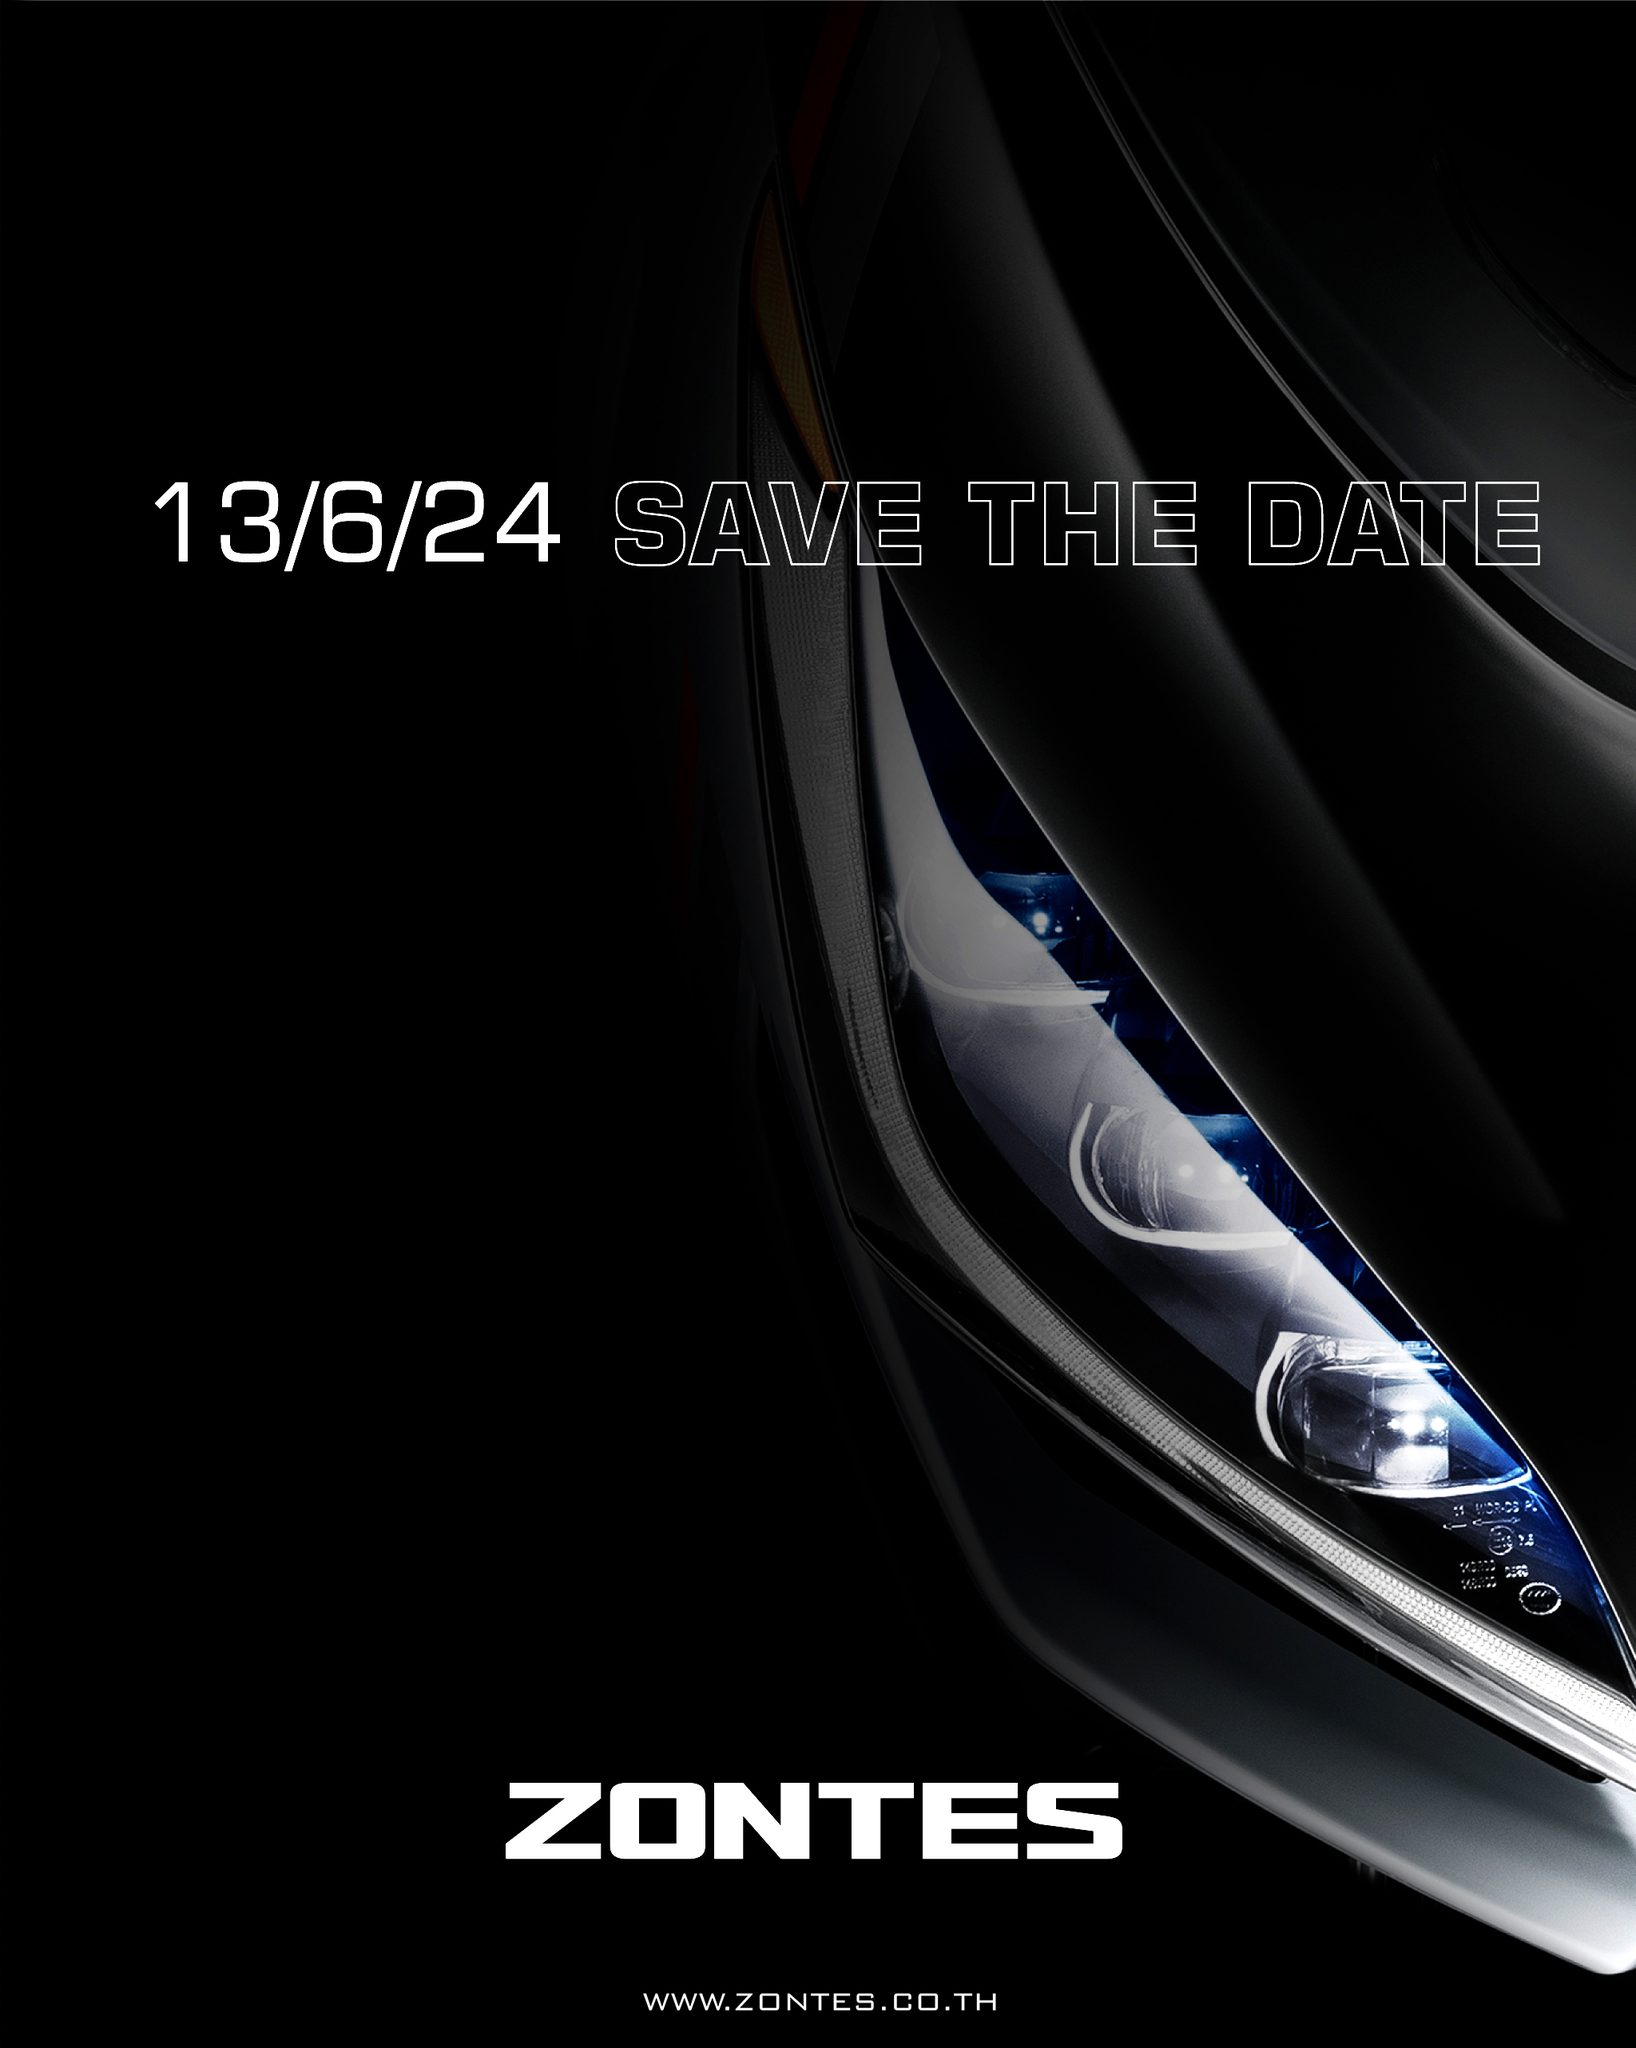 SAVE THE DATE - ZONTES